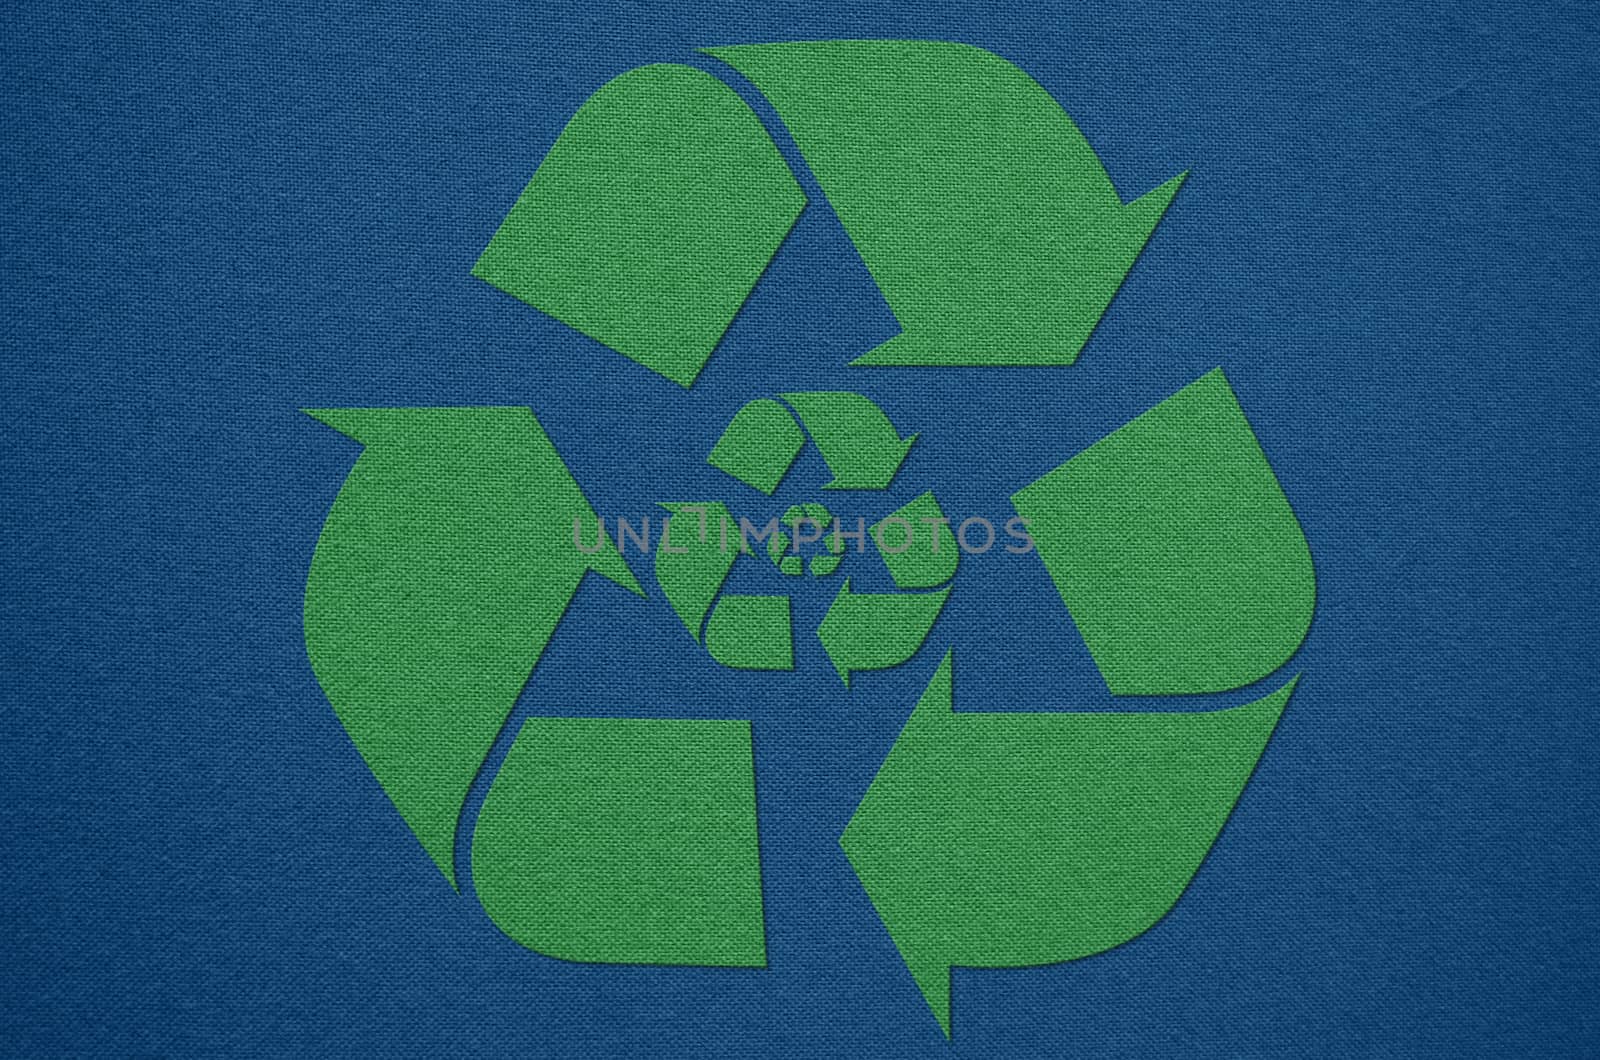 recycle symbol from fabric